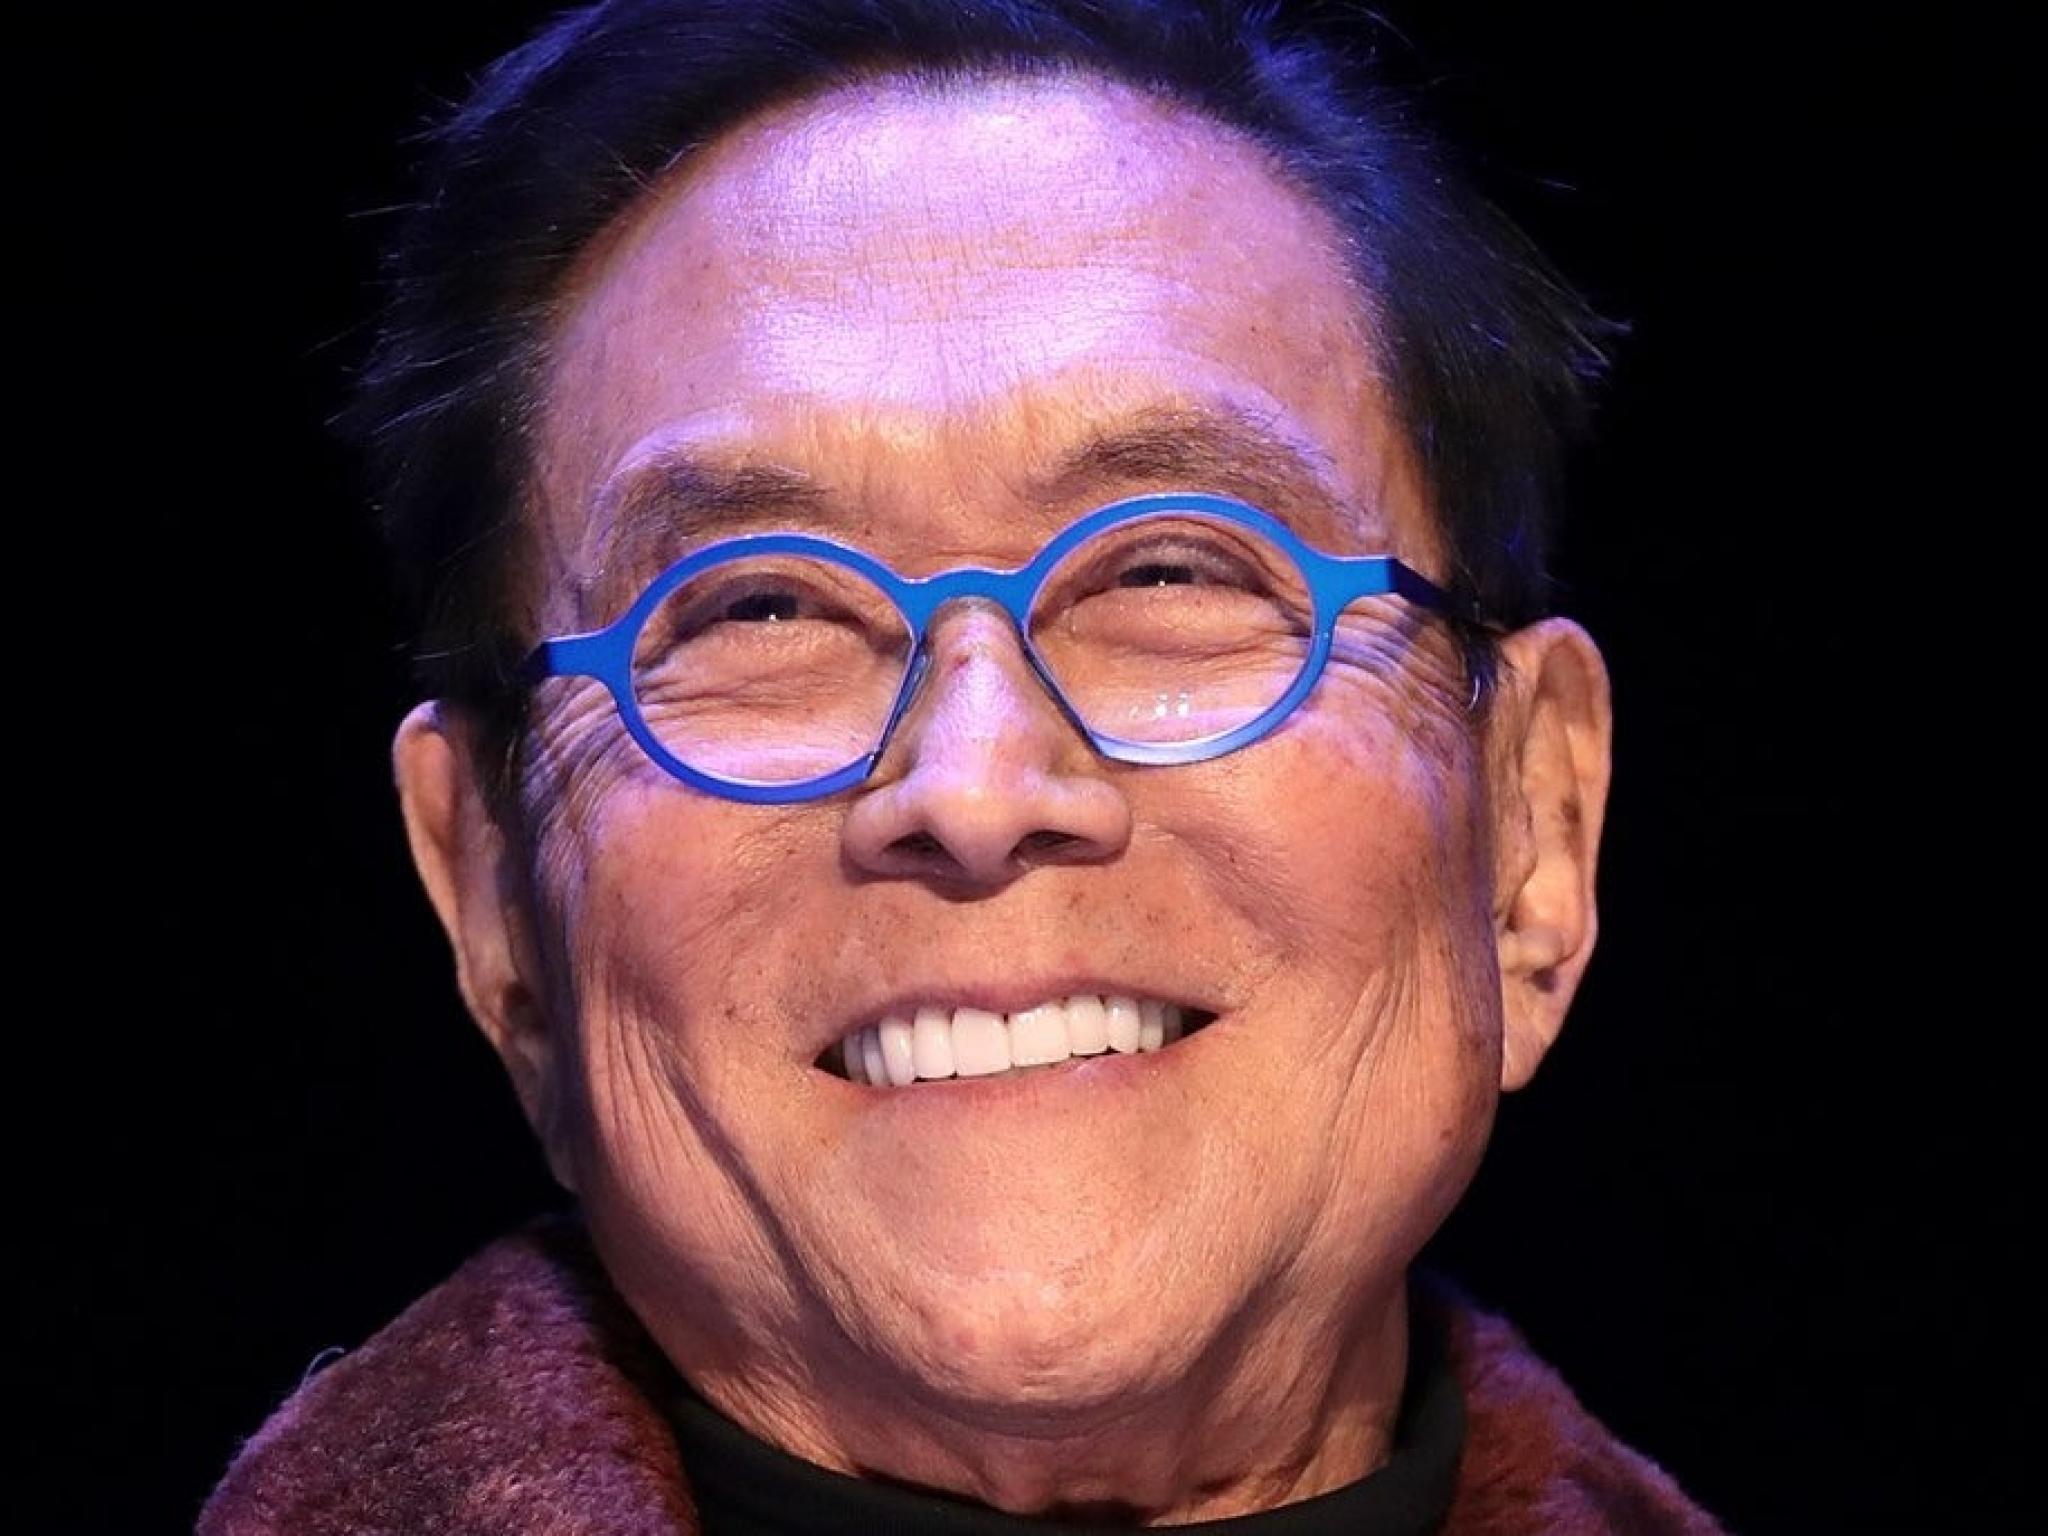  rich-dad-poor-dad-author-robert-kiyosaki-says-charts-indicate-biggest-crash-in-history-coming--followed-by-a-bitcoin-bull-run-in-which-king-crypto-easily-touches-10m 